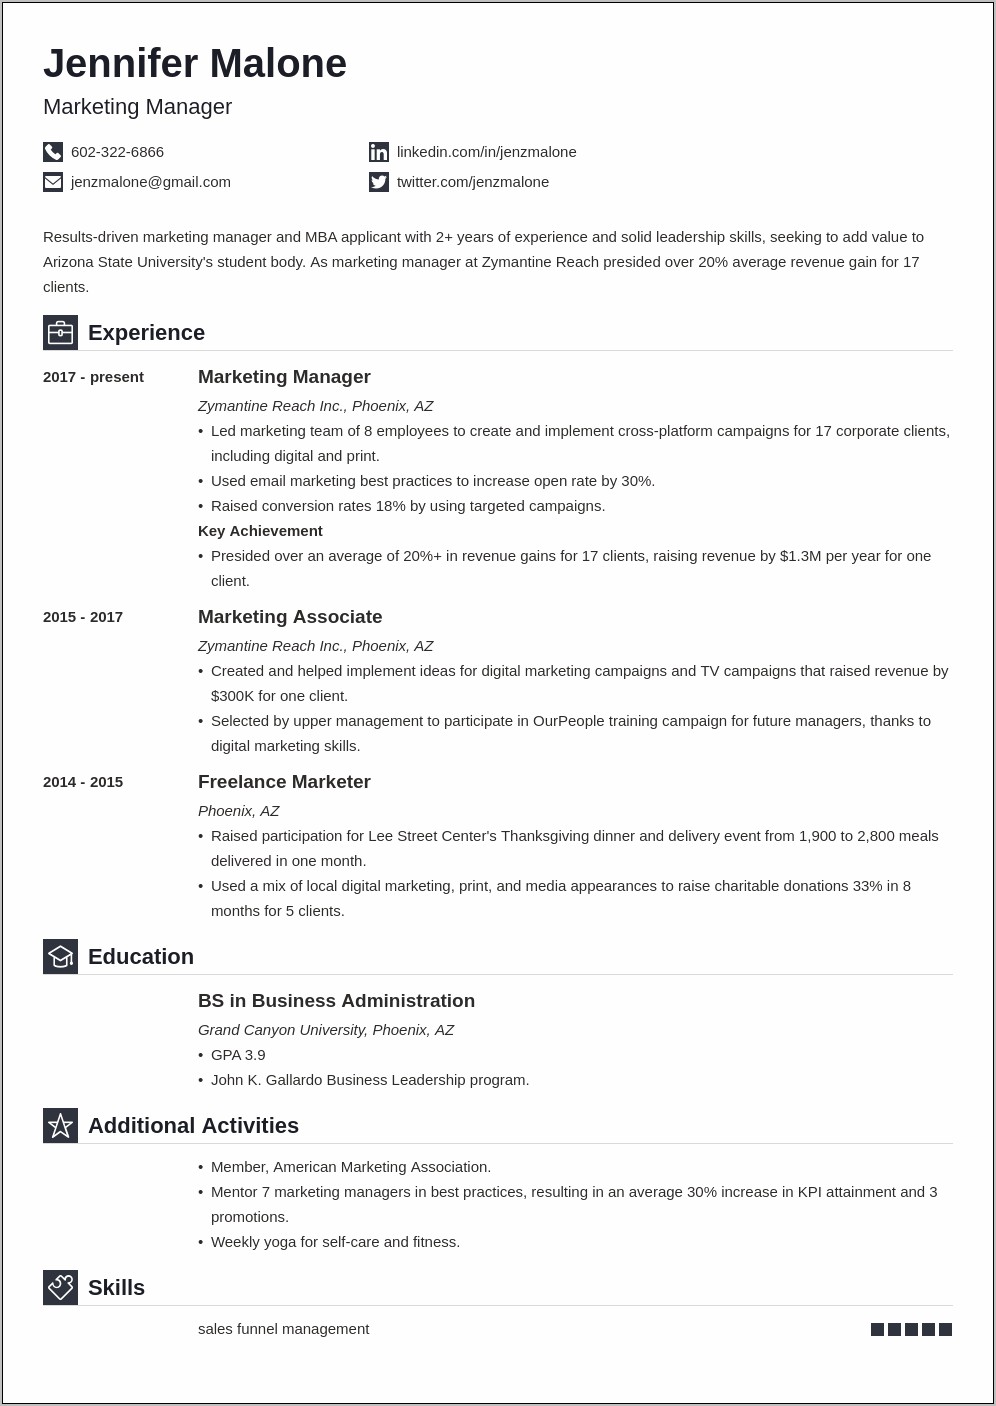 Sample Resume For Engineer With Mba